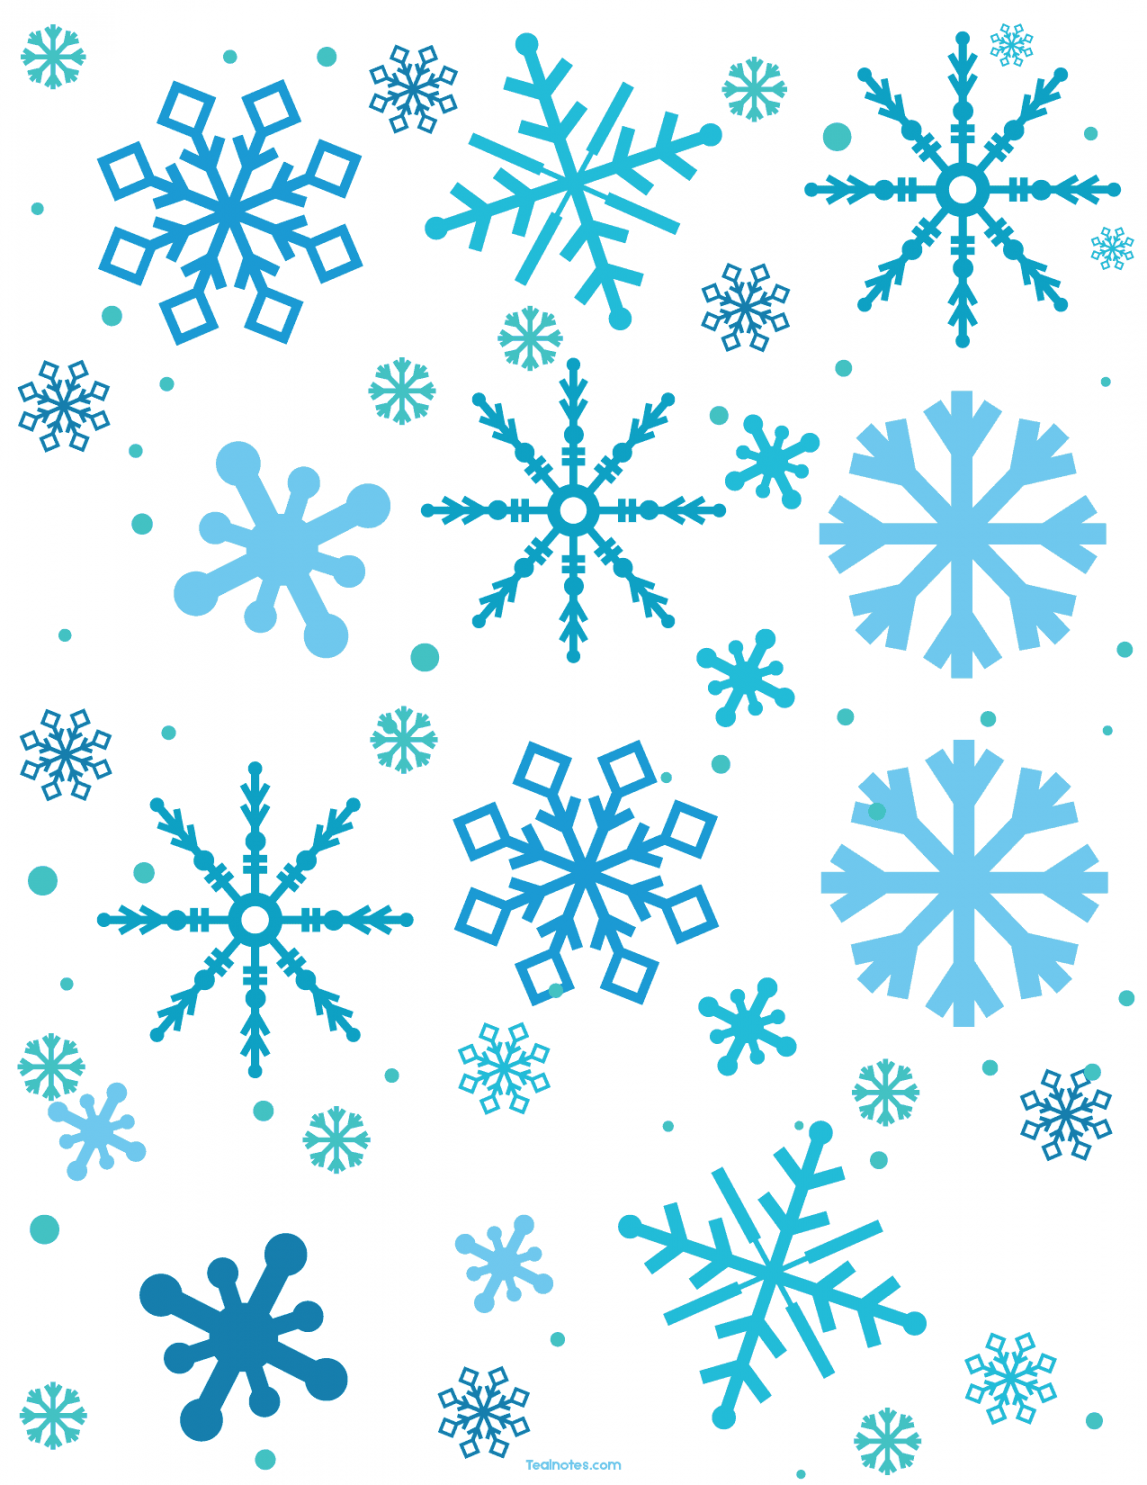 Free Snowflake Template: Easy Paper Snowflakes To Cut And Color - FREE Printables - Snowflake Template Free